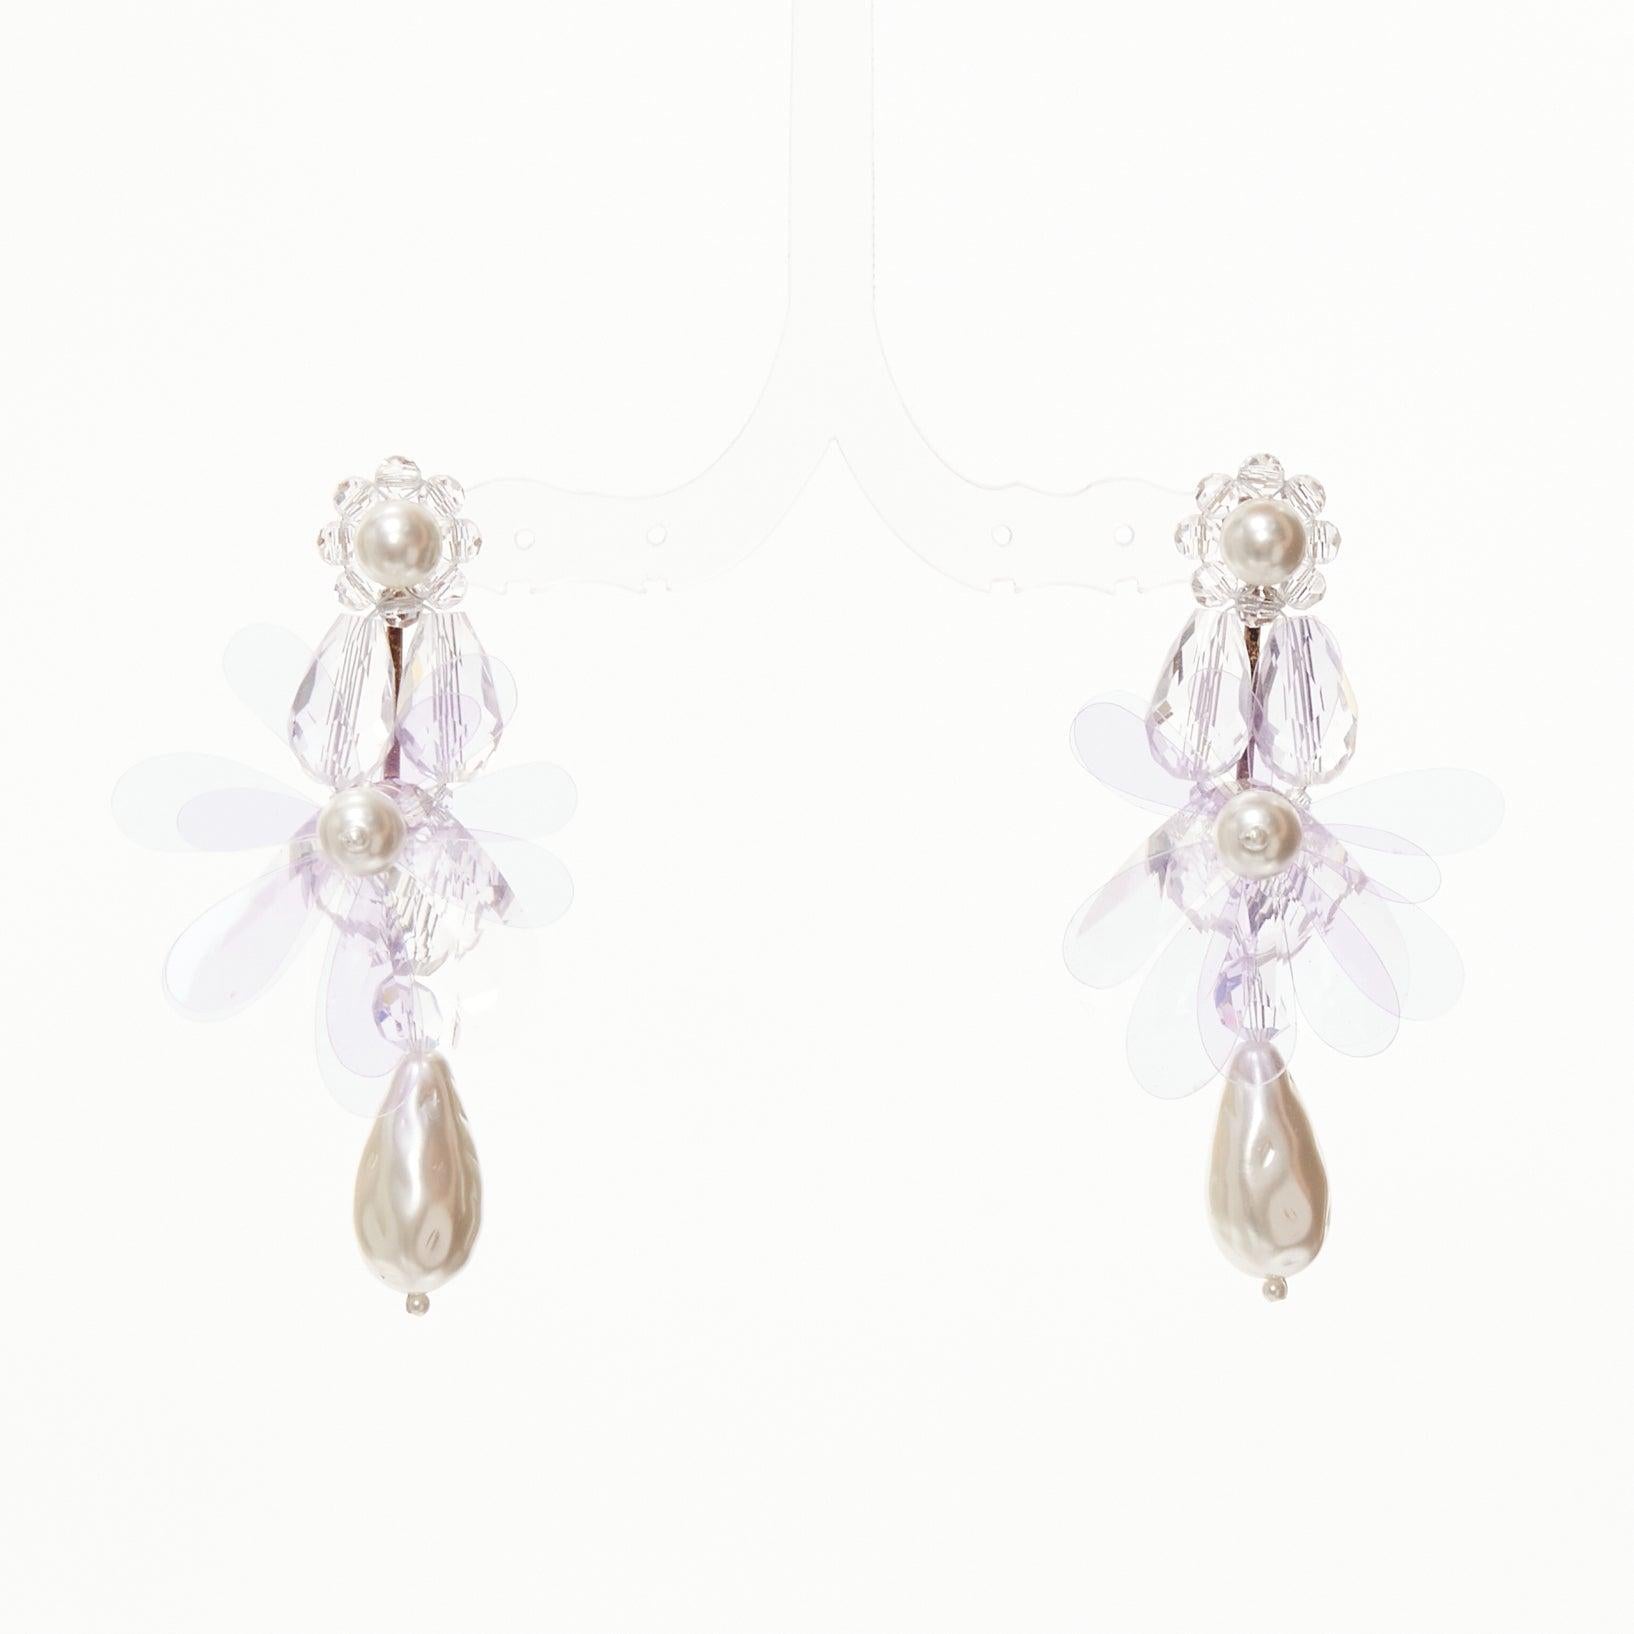 SIMONE ROCHA lilac purple plastic flower drop faux pearl pin earrings
Reference: AAWC/A01238
Brand: Simone Rocha
Material: Plastic, Faux Pearl
Color: Purple, Pearl
Pattern: Floral
Closure: Pin
Lining: Gold Metal
Extra Details: Logo